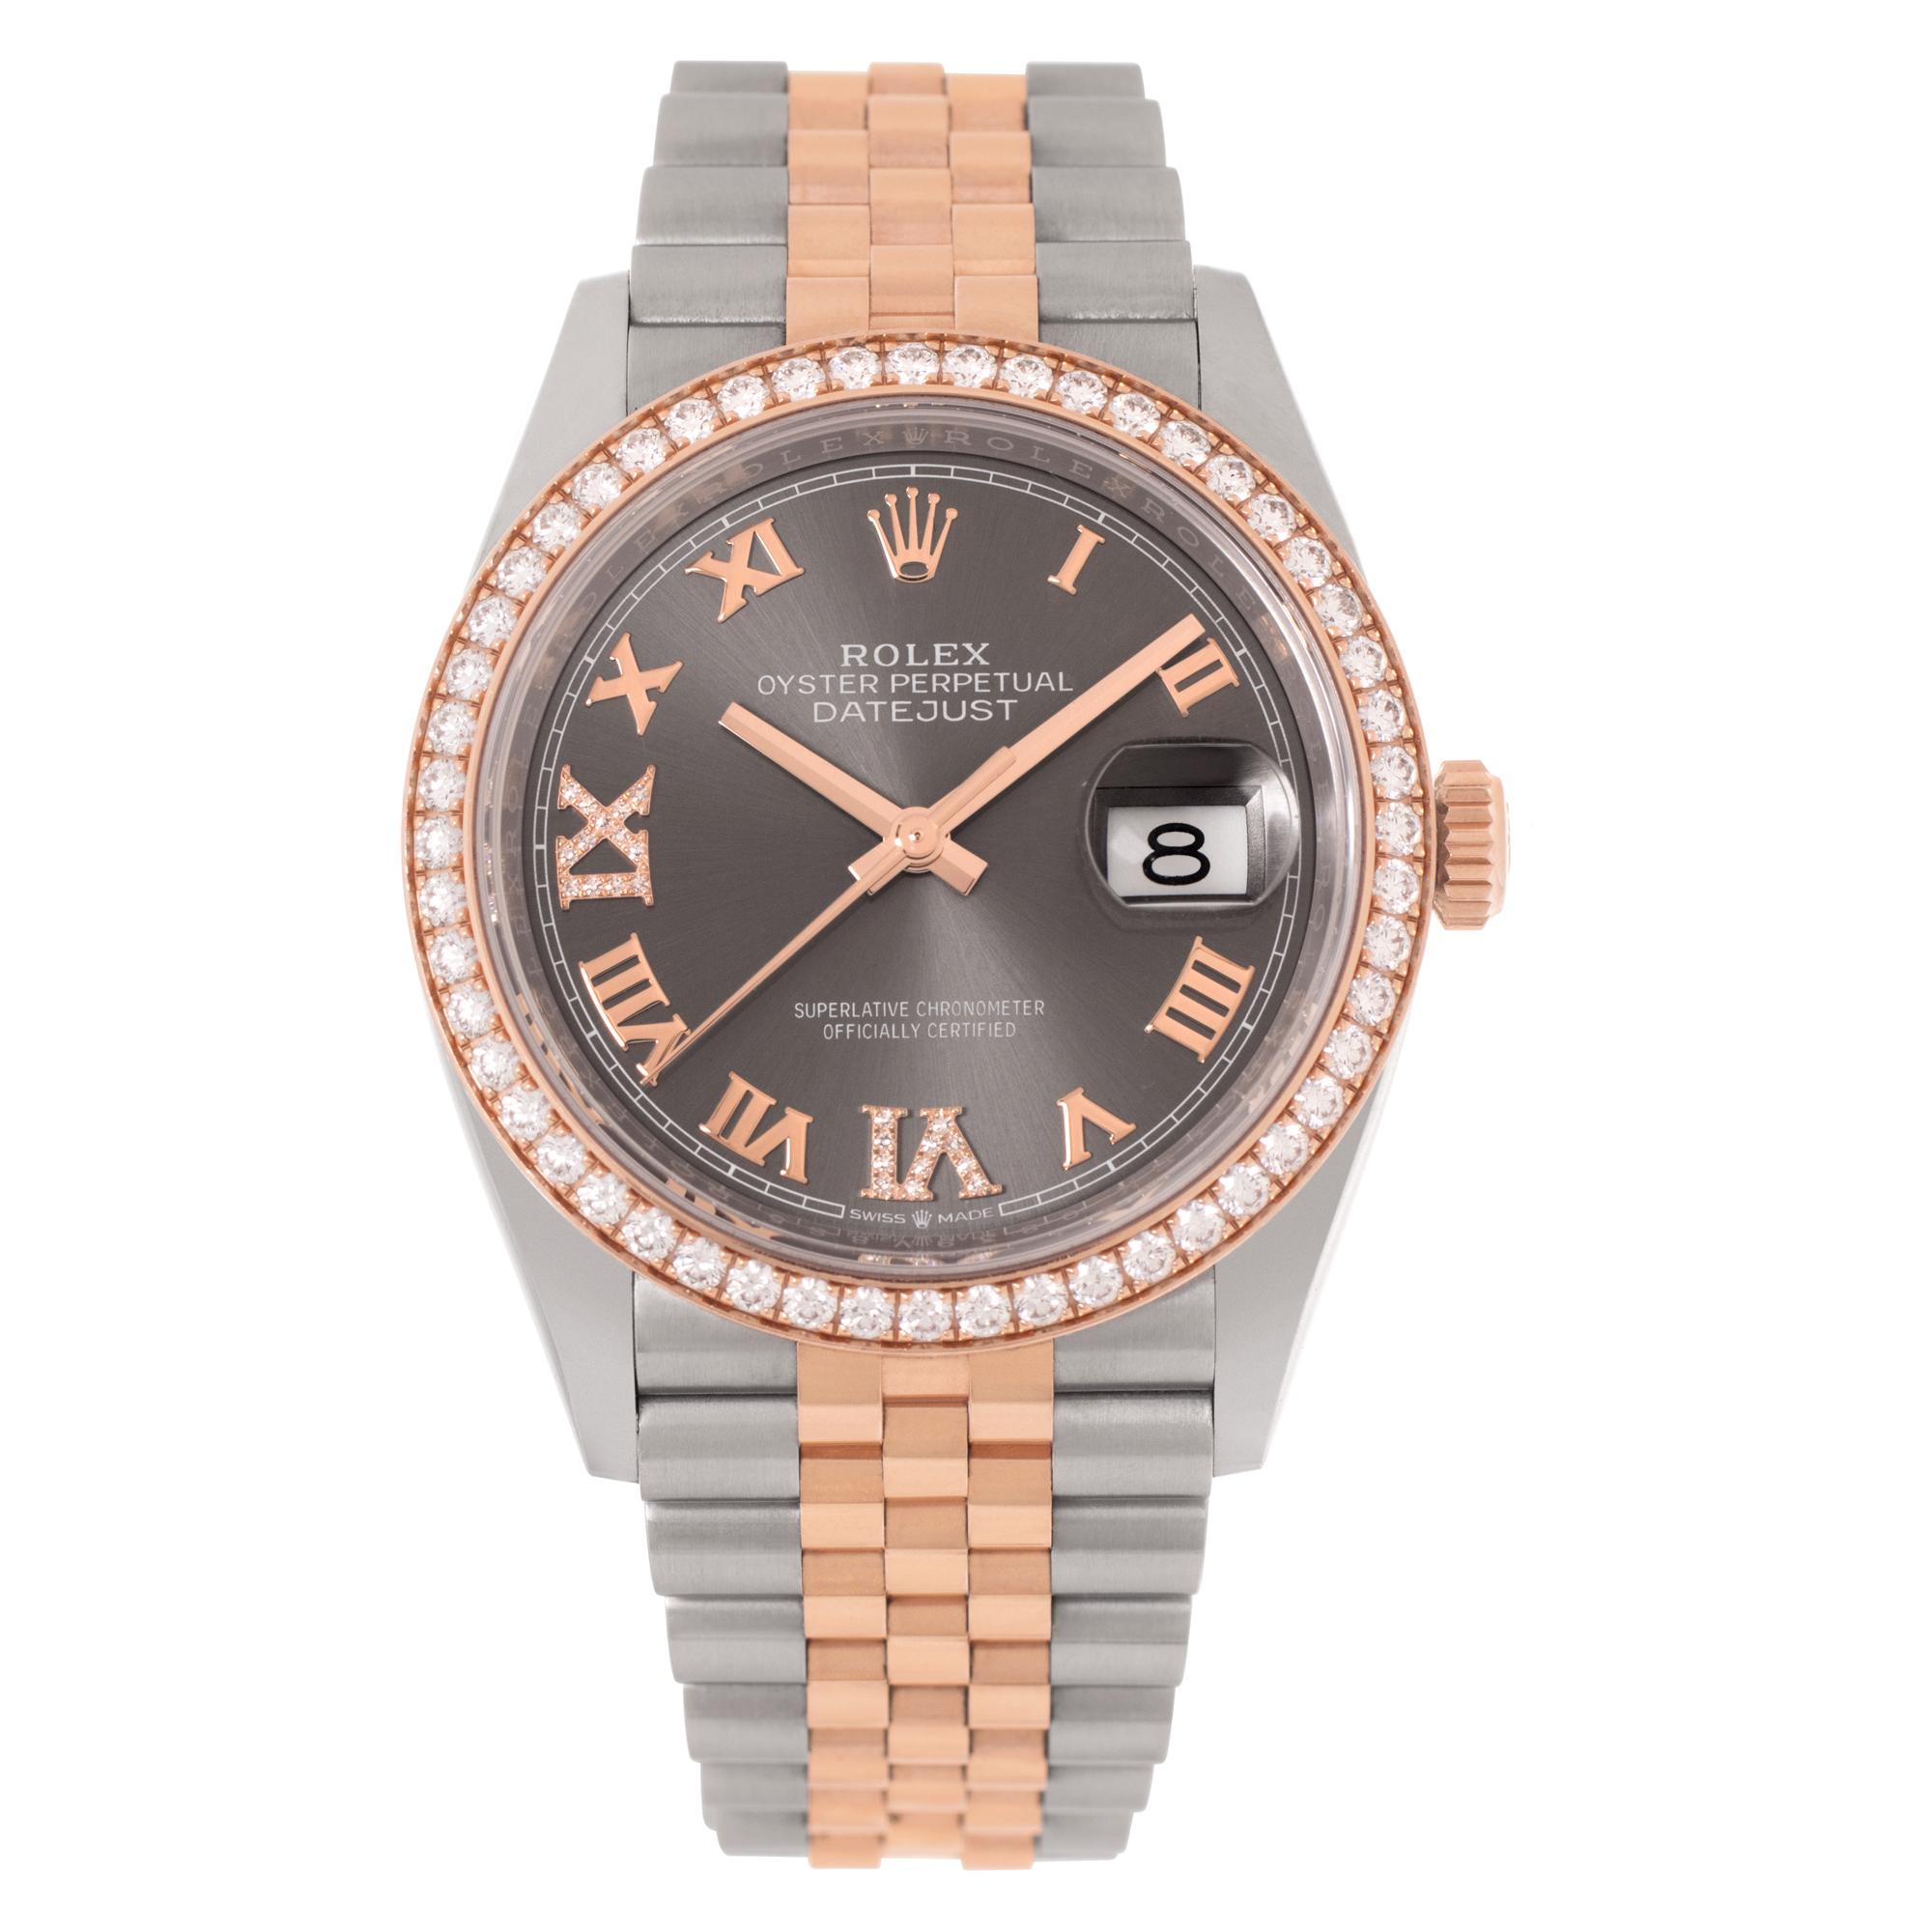 Modern Rolex Datejust in Stainless Steel & 18k Rose Gold, Ref. 126281 RBR